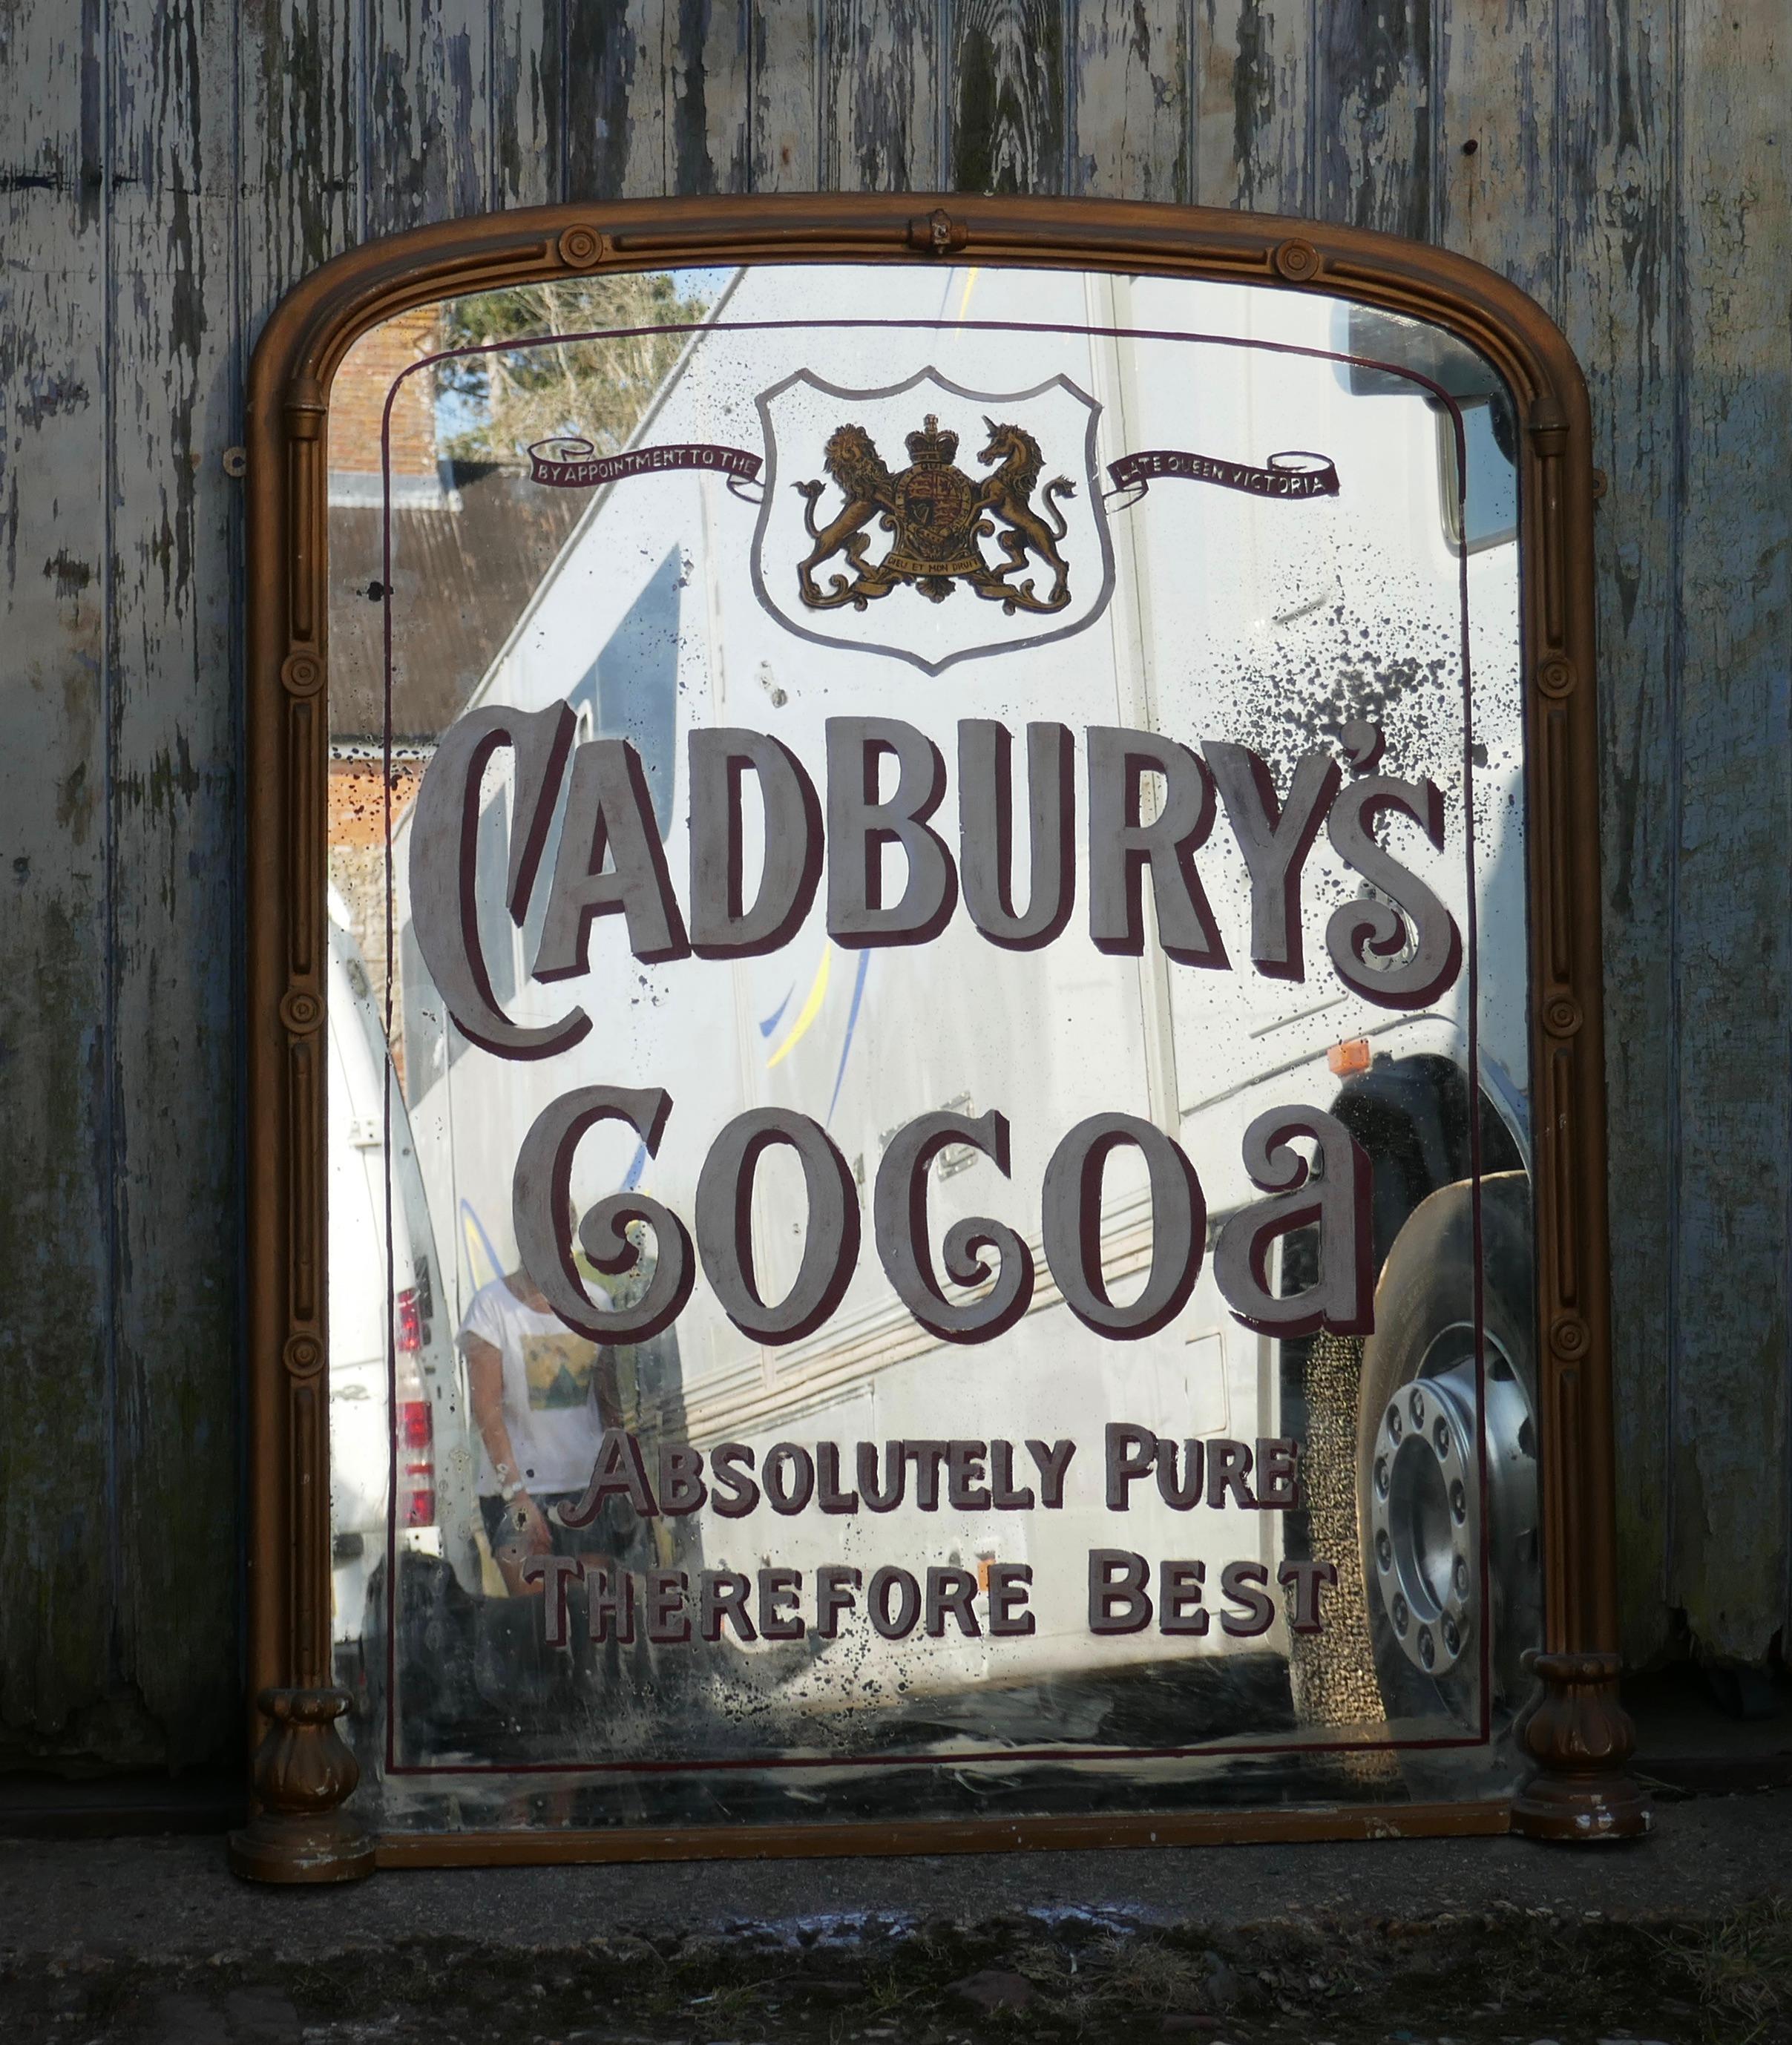 Large Cadbury coca shop advertising wall mirror, with royal appointment

The mirror has painted white and red shadowed lettering, it has a plain D-shaped 3” wide gilt overmantel style frame

The looking glass is in fair condition with some